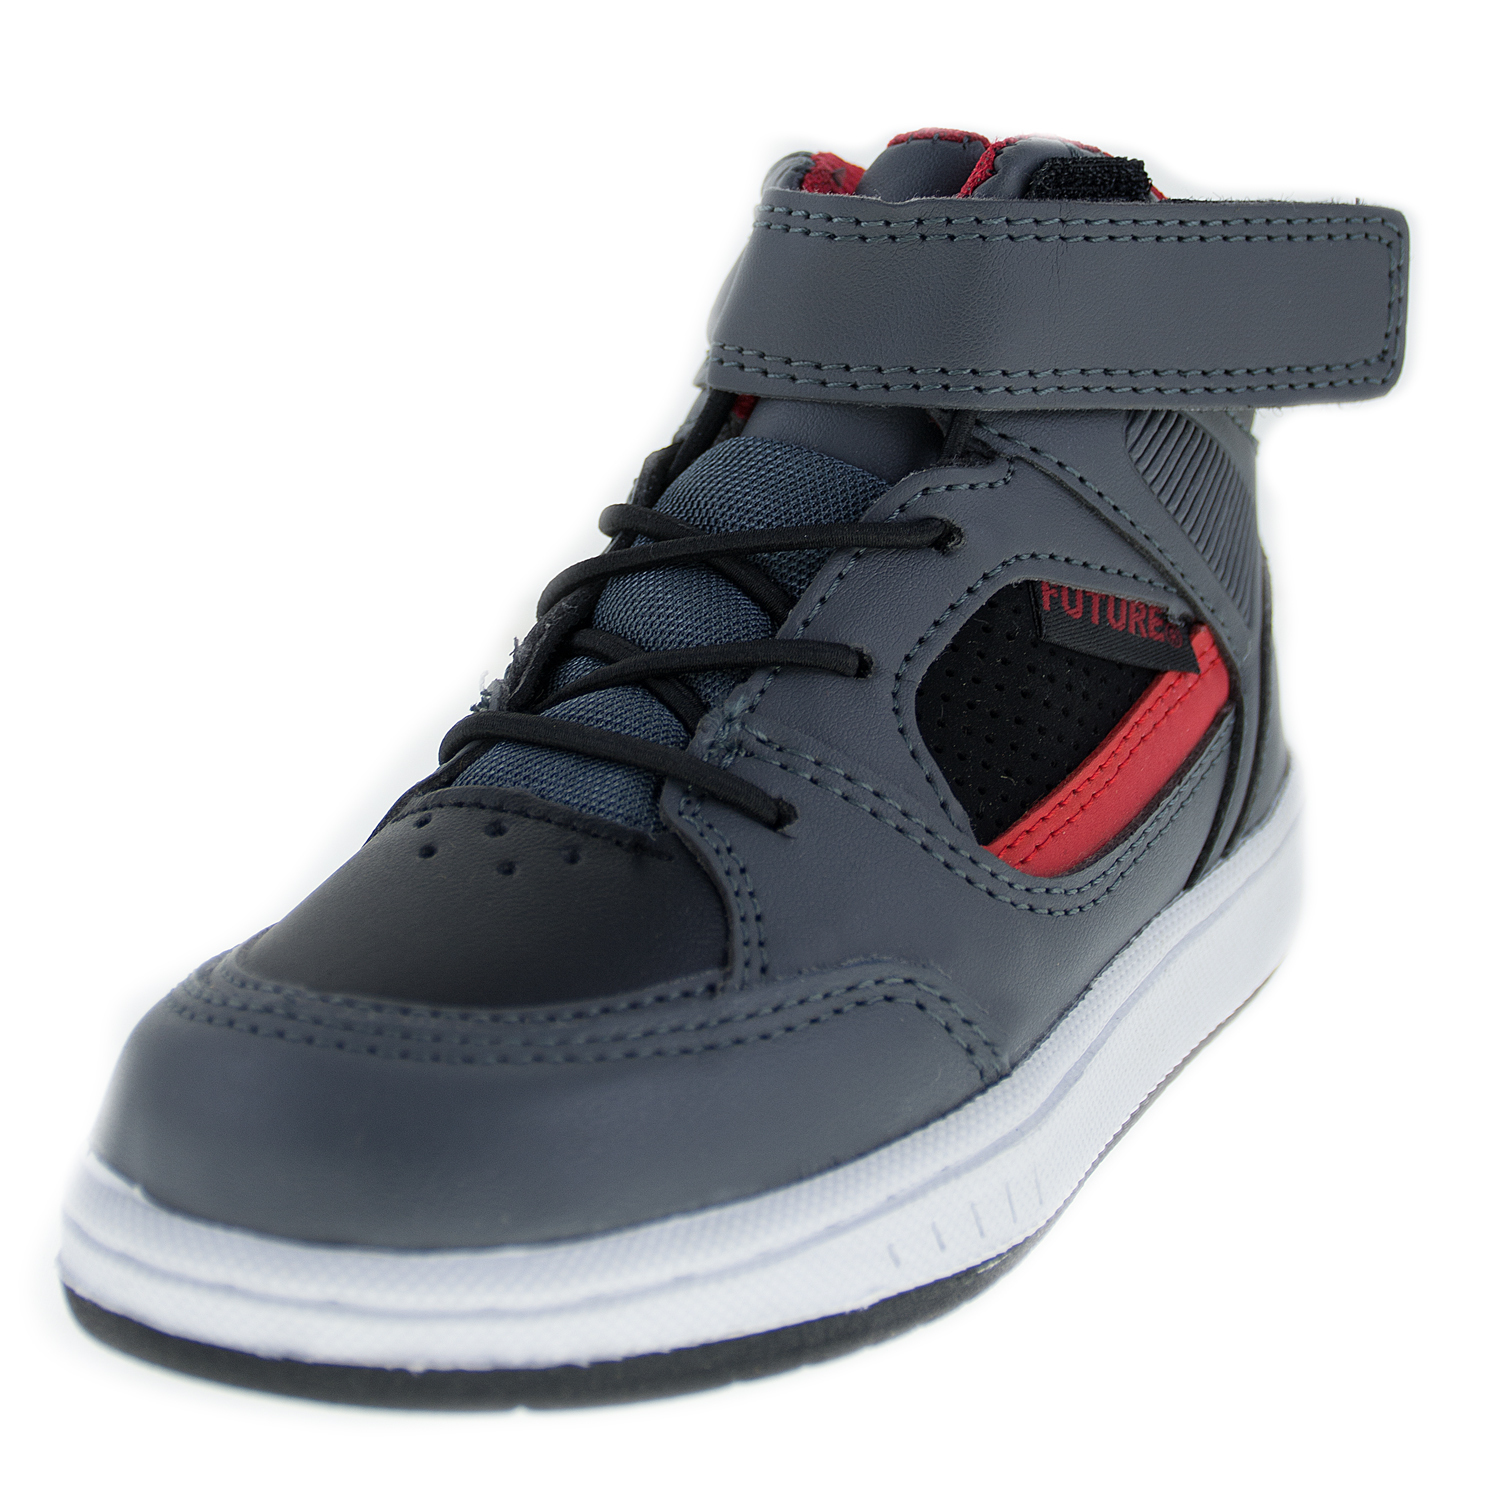 Boy's Future High-Top Gray Toddler/Youth Tennis Shoes - Boys' Shoes